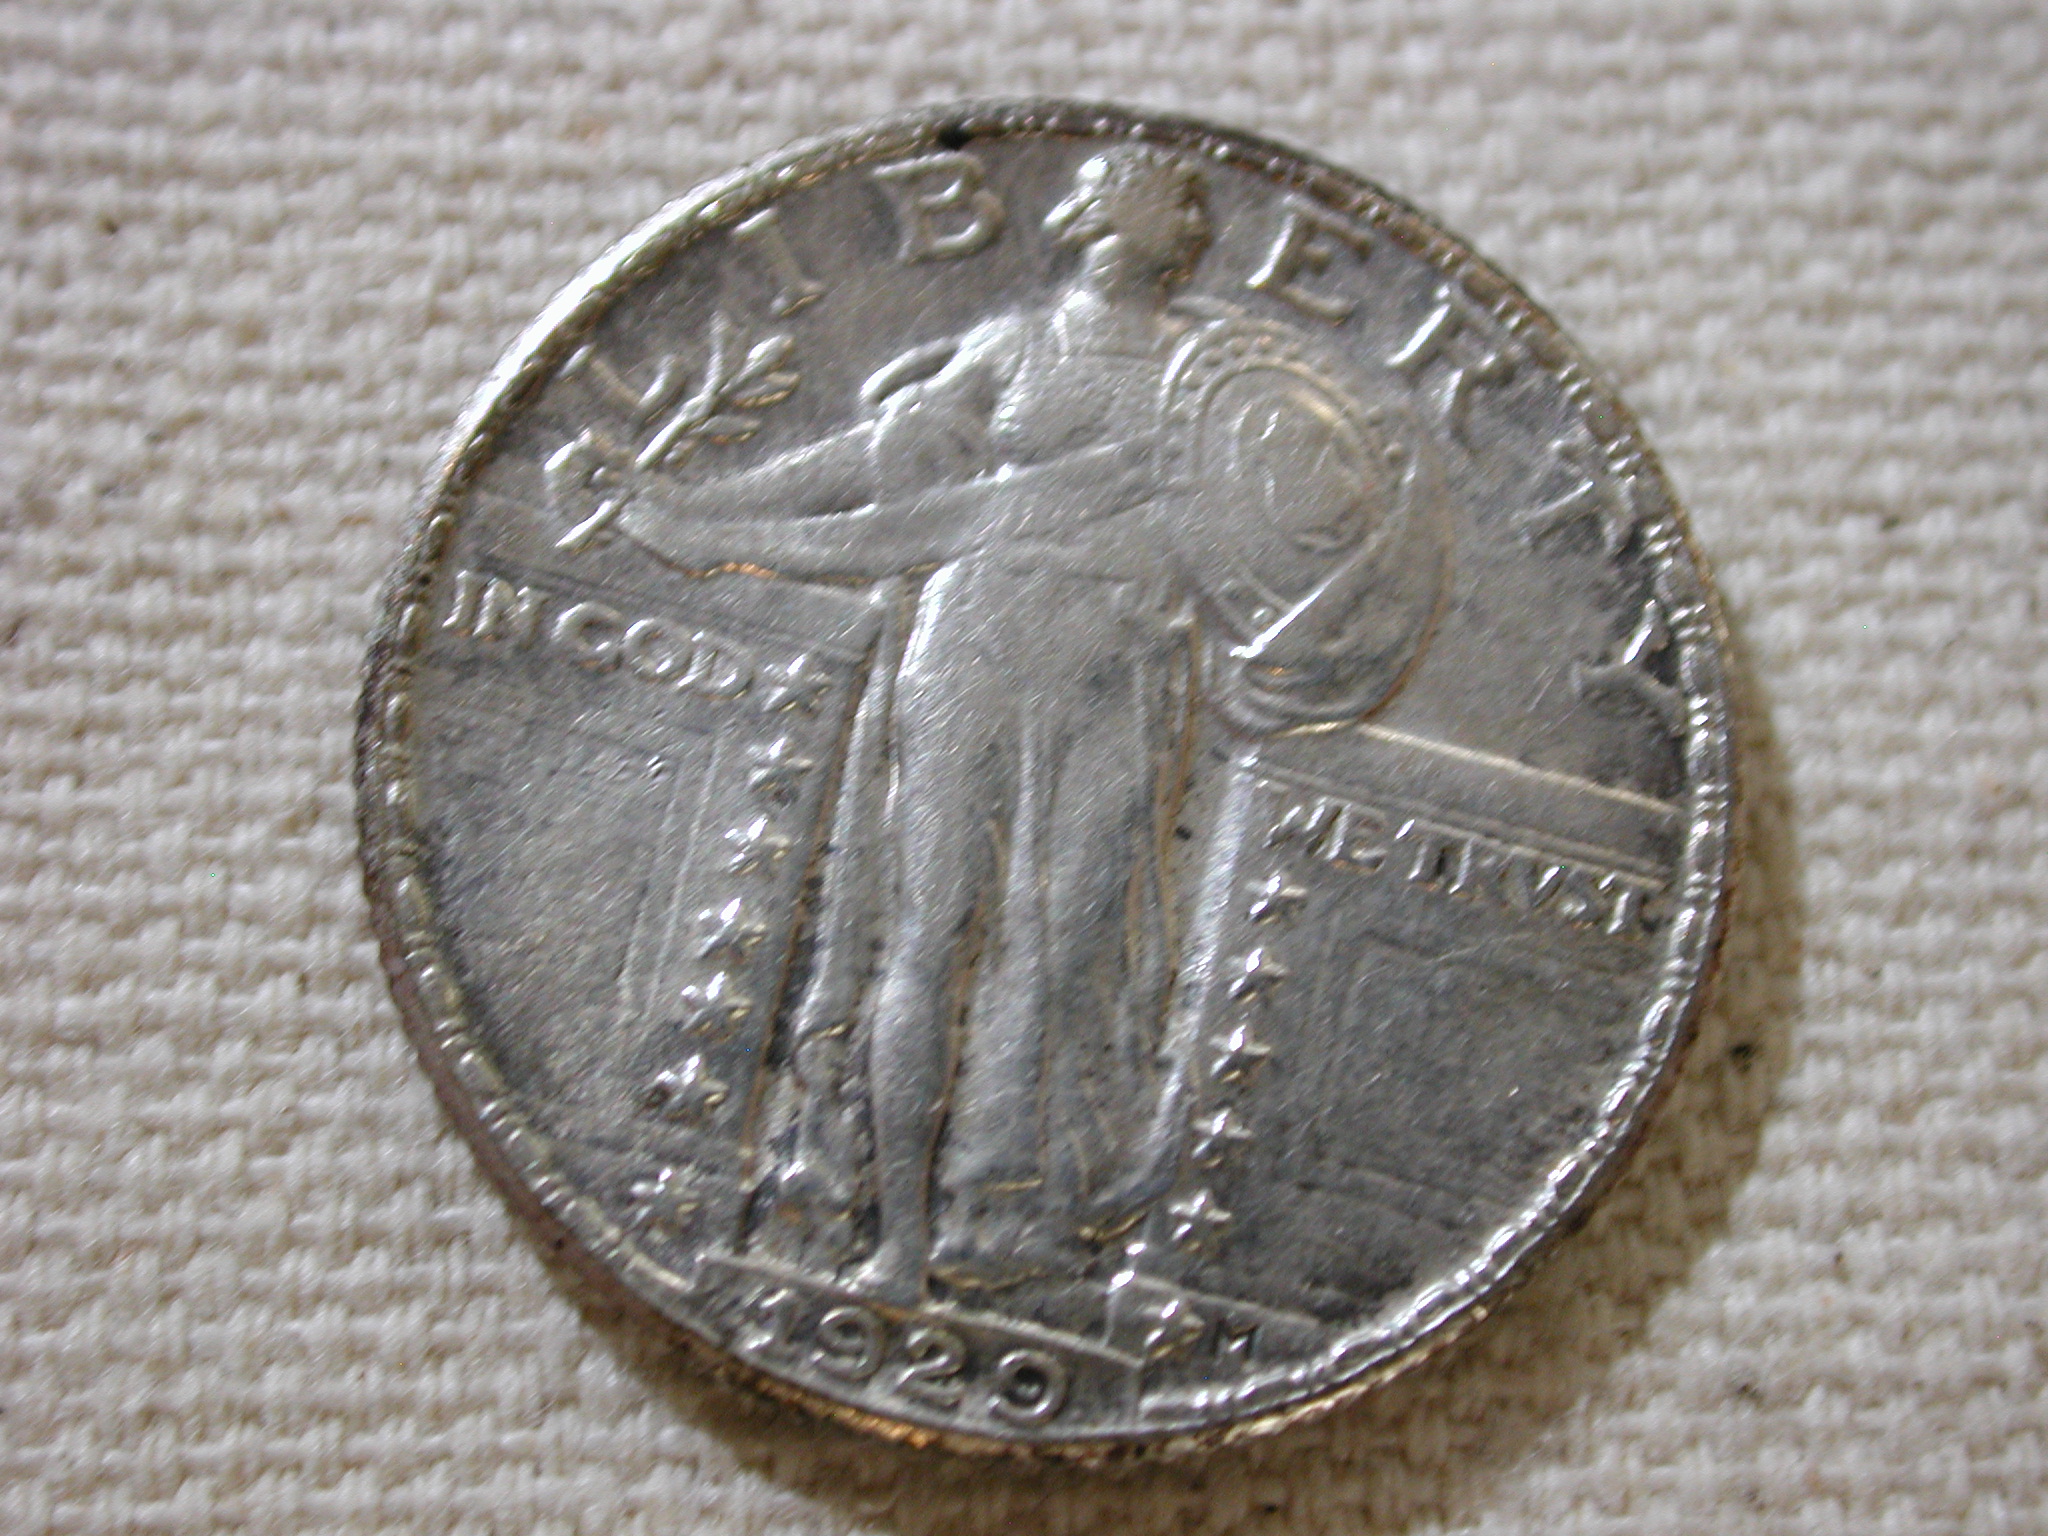 1929 U.S Standing Liberty Quarter About Uncirculated